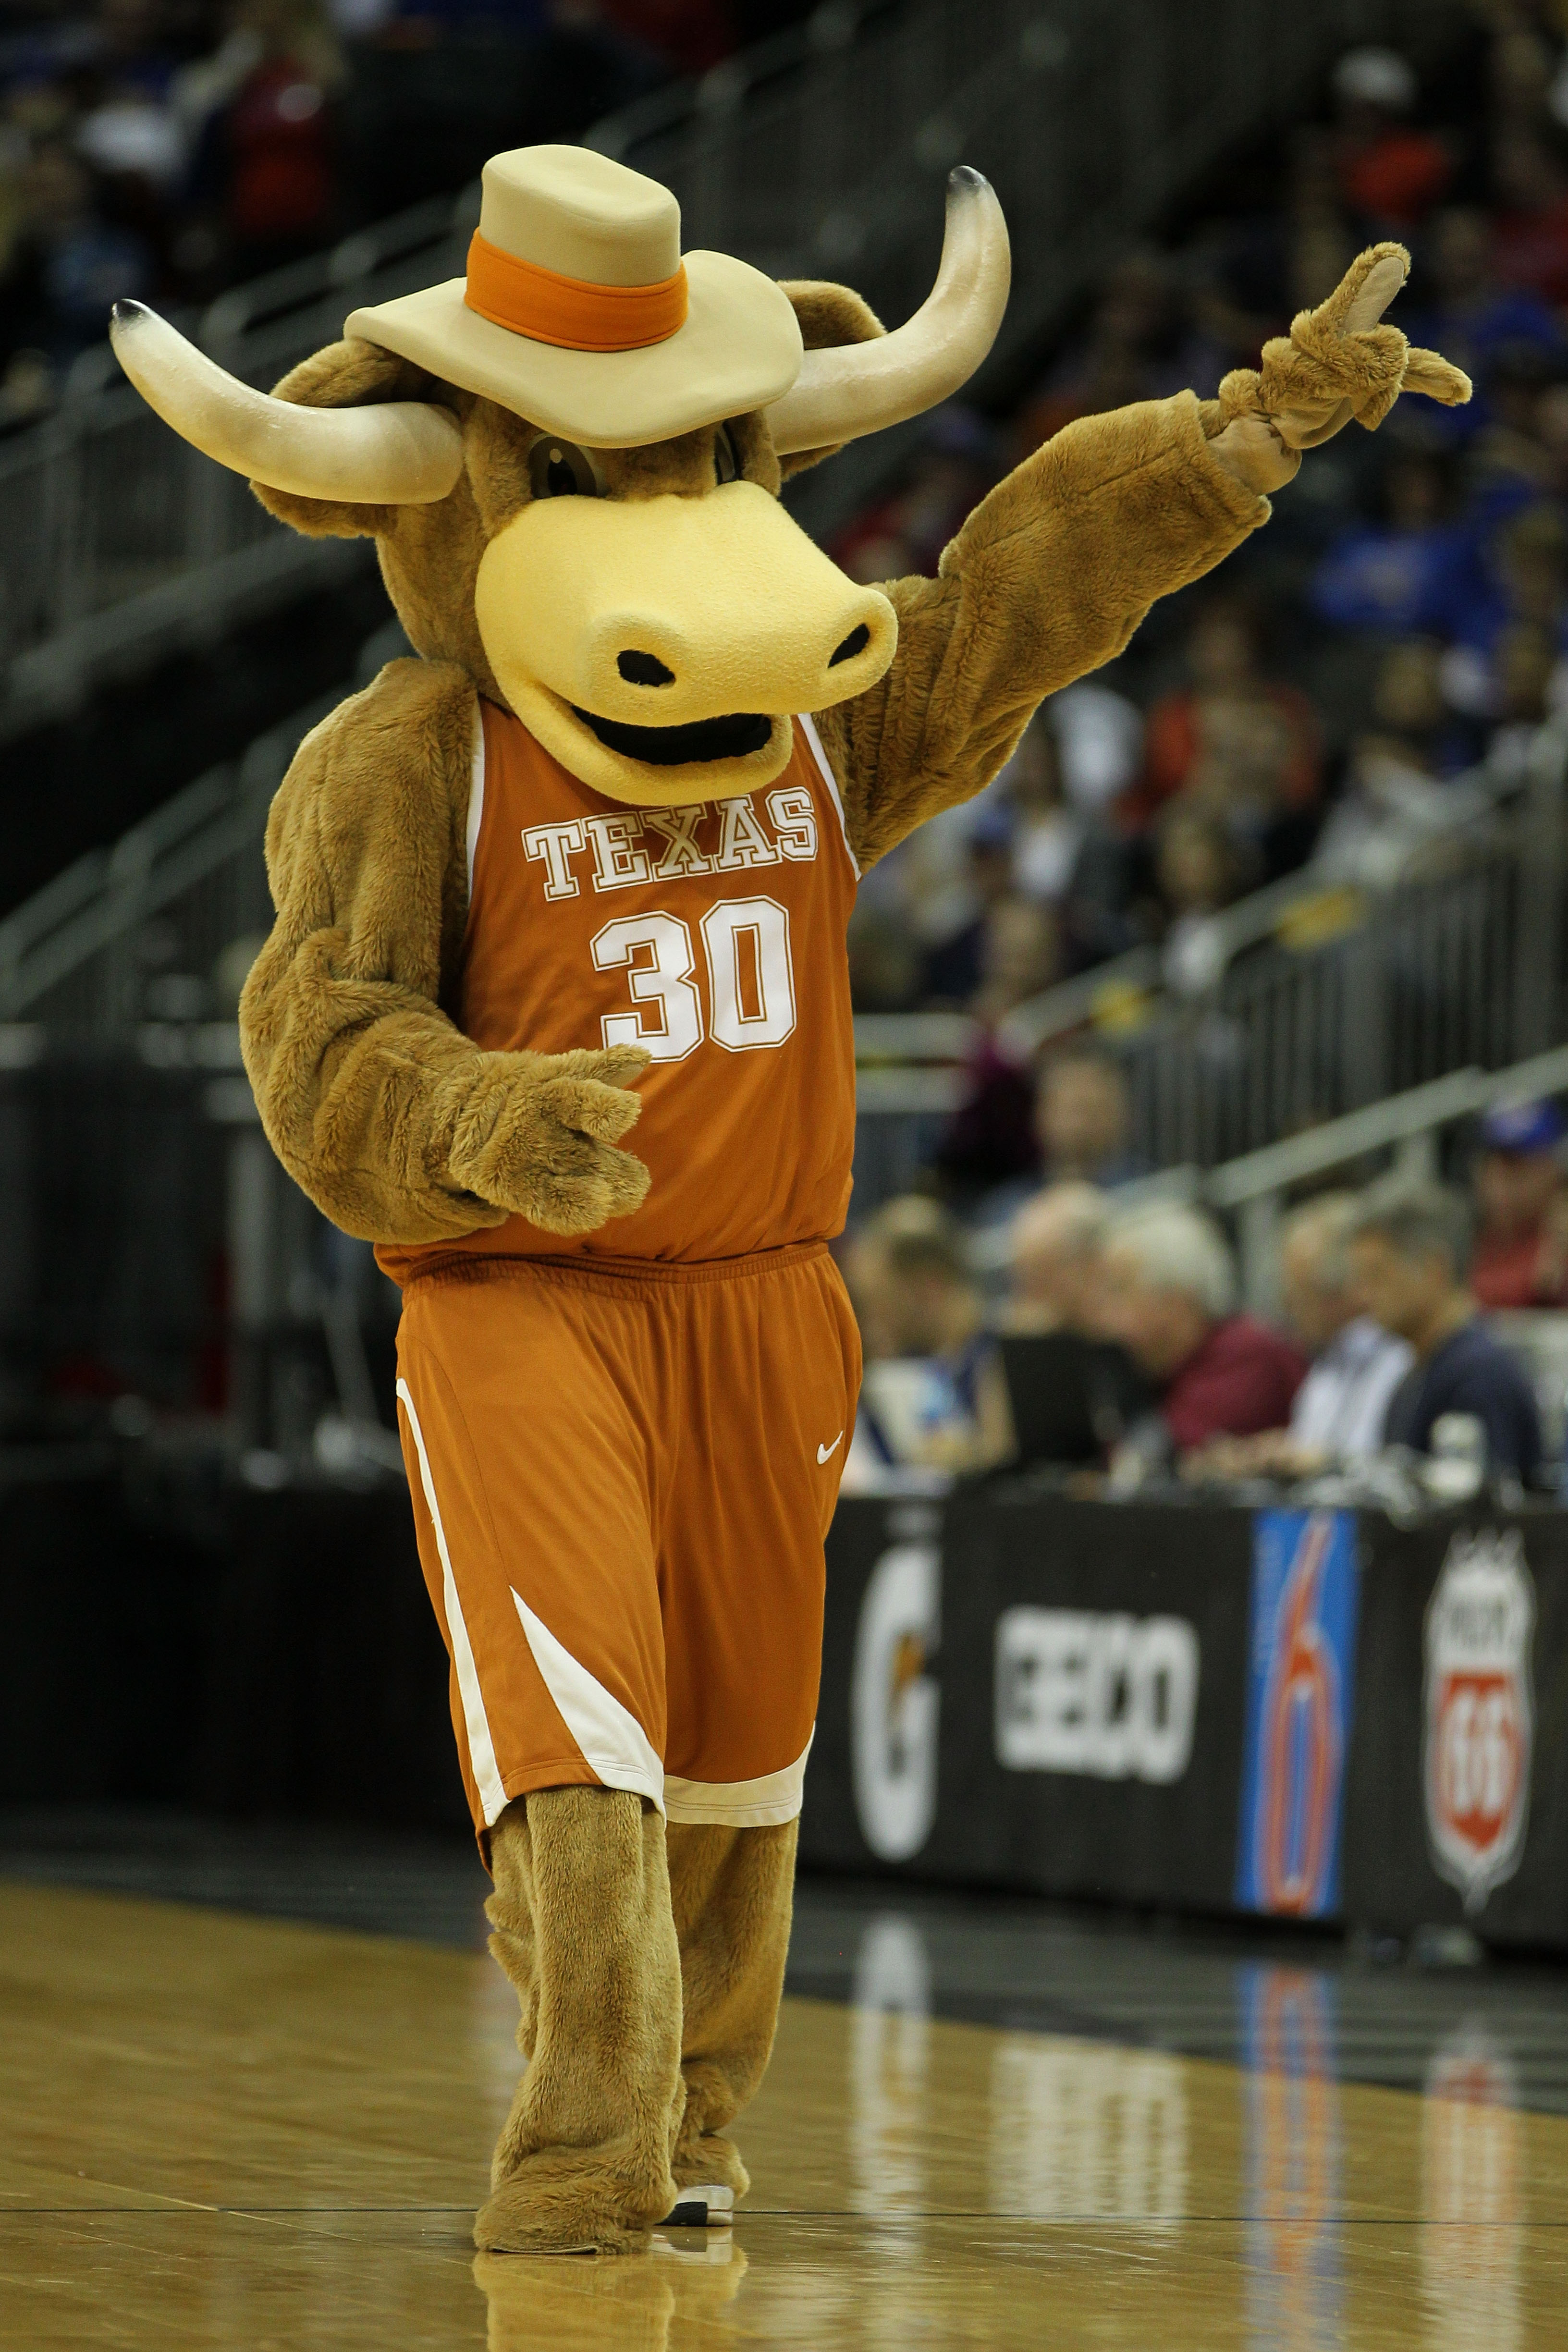 KANSAS CITY, MO - MARCH 11:  The Texas Longhorns mascot performs during their semifinal game against the Texas A&M Aggies in the 2011 Phillips 66 Big 12 Men's Basketball Tournament at Sprint Center on March 11, 2011 in Kansas City, Missouri.  (Photo by Ja